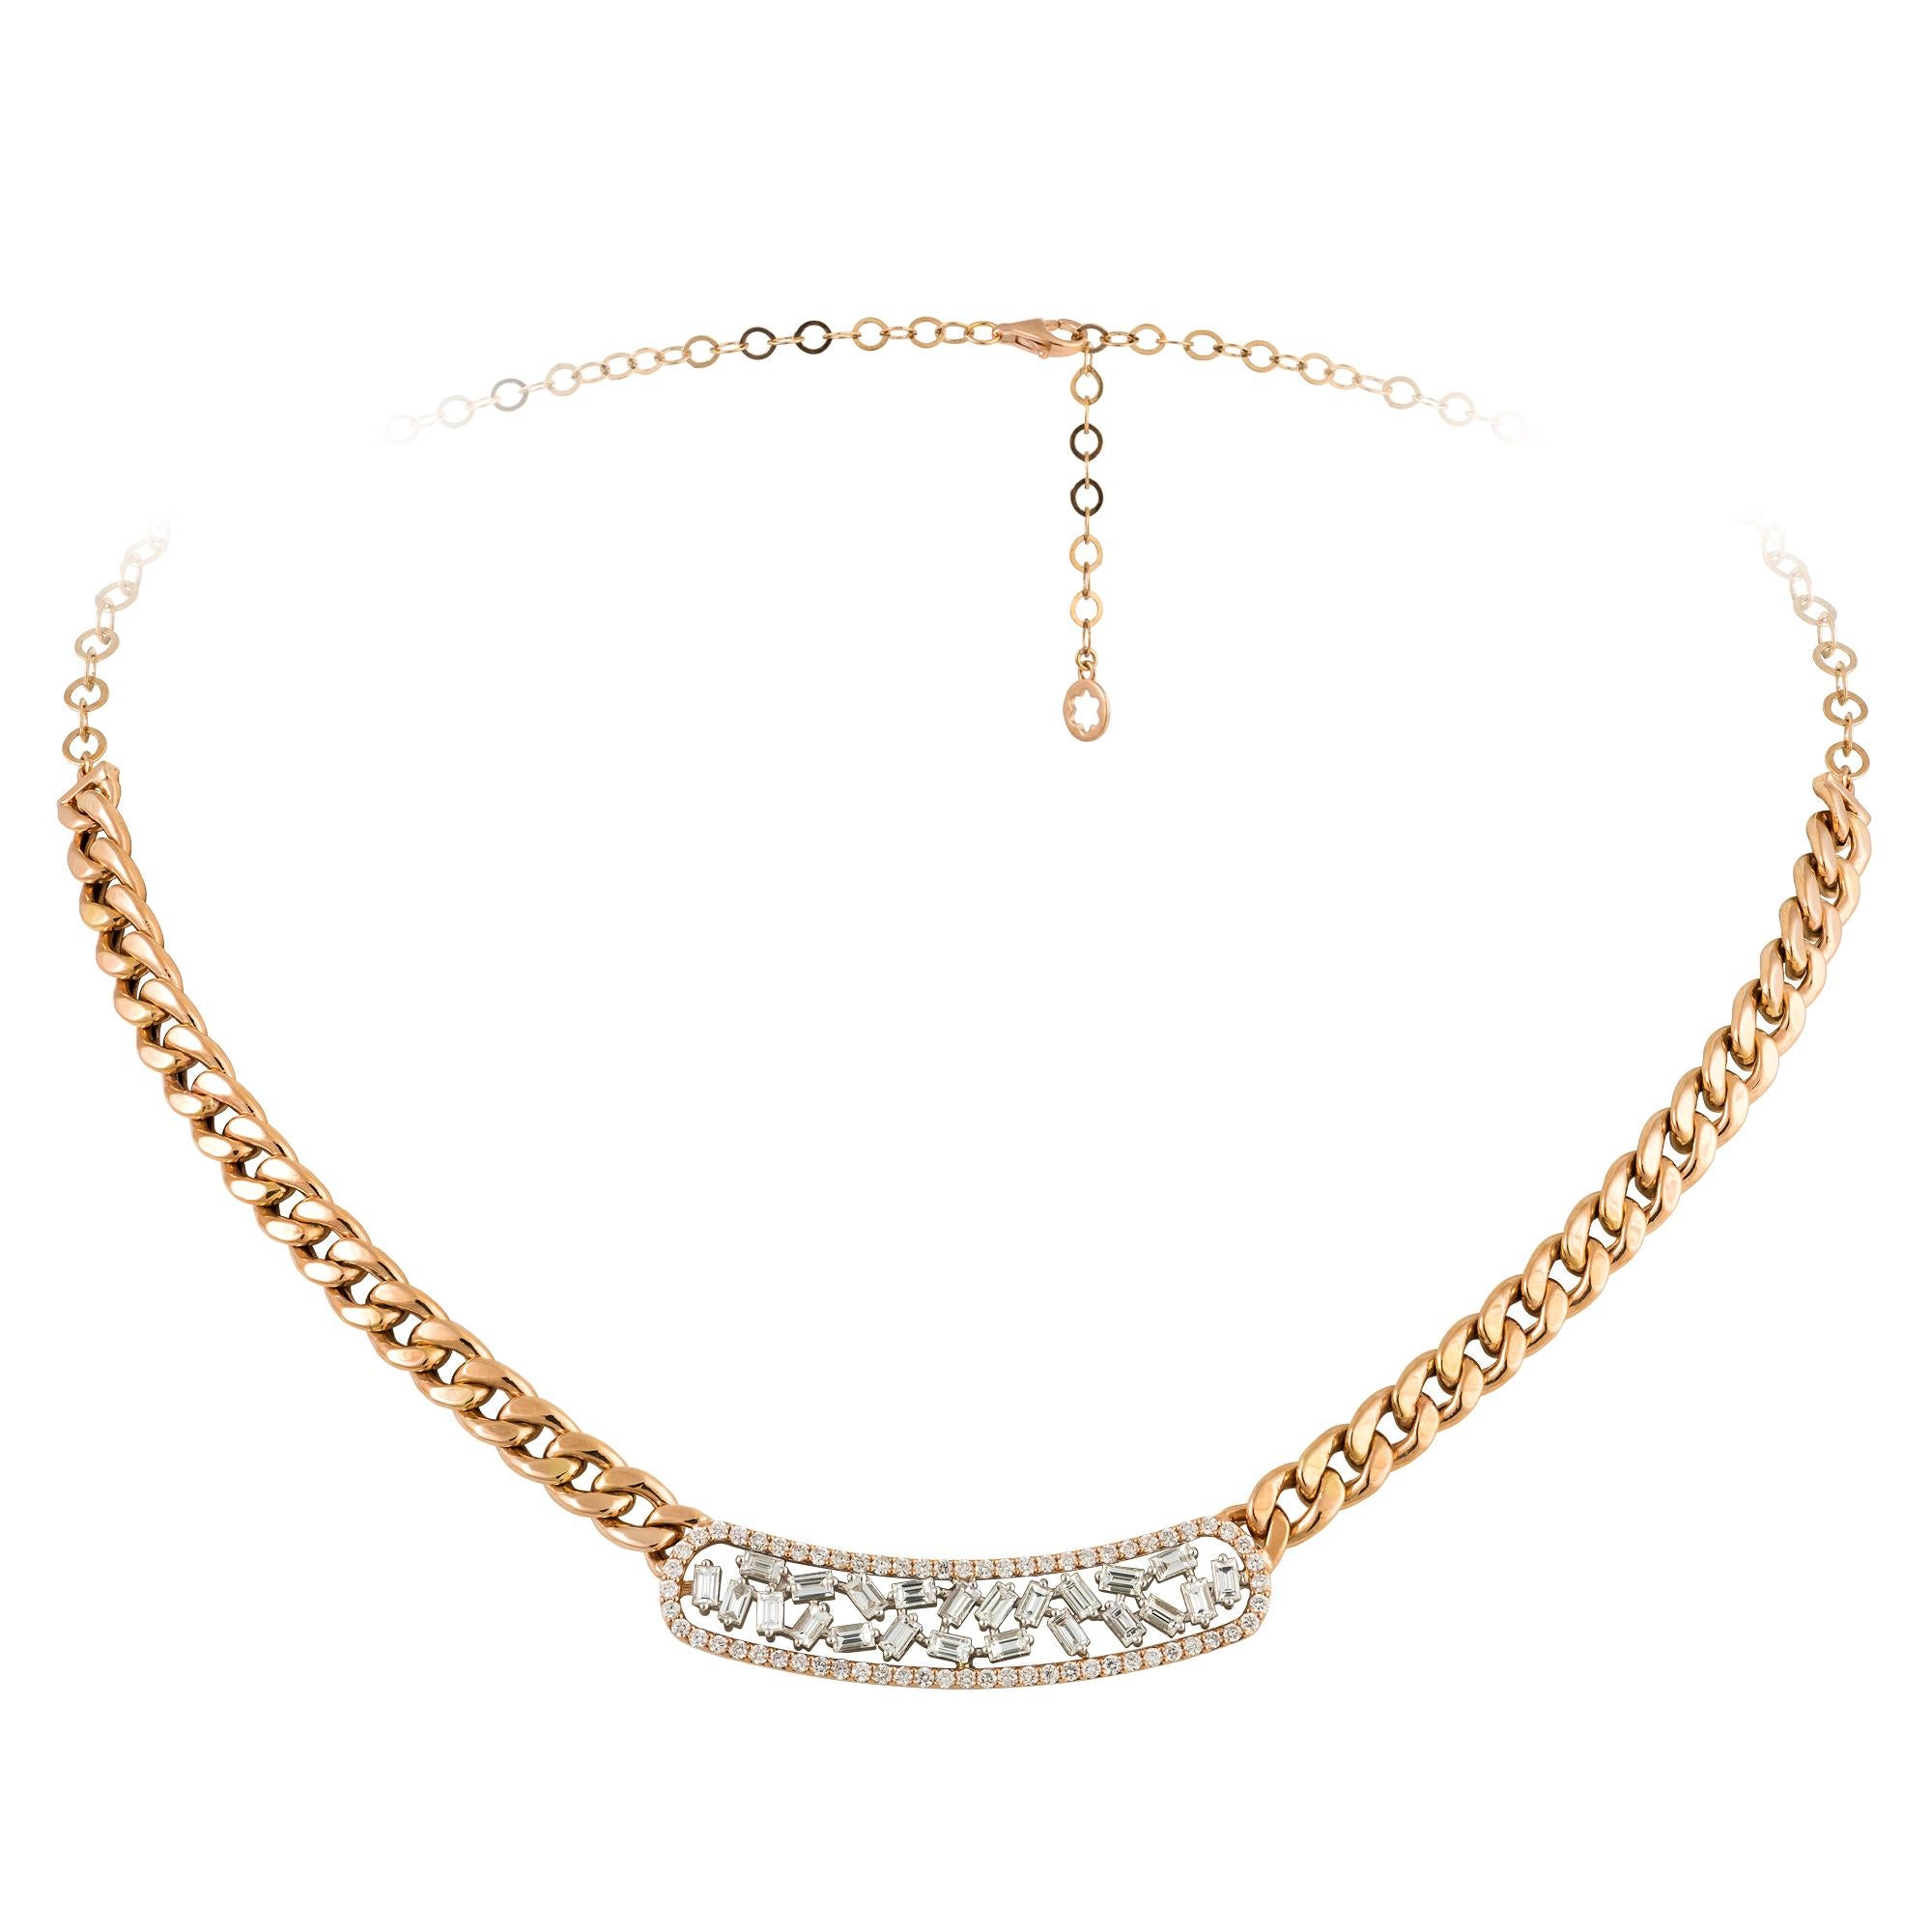 NECKLACE 18K White/Pink Gold Diamond 0.51 Cts/64 Pcs Tapered Baguette 0.94 Cts/23 Pcs